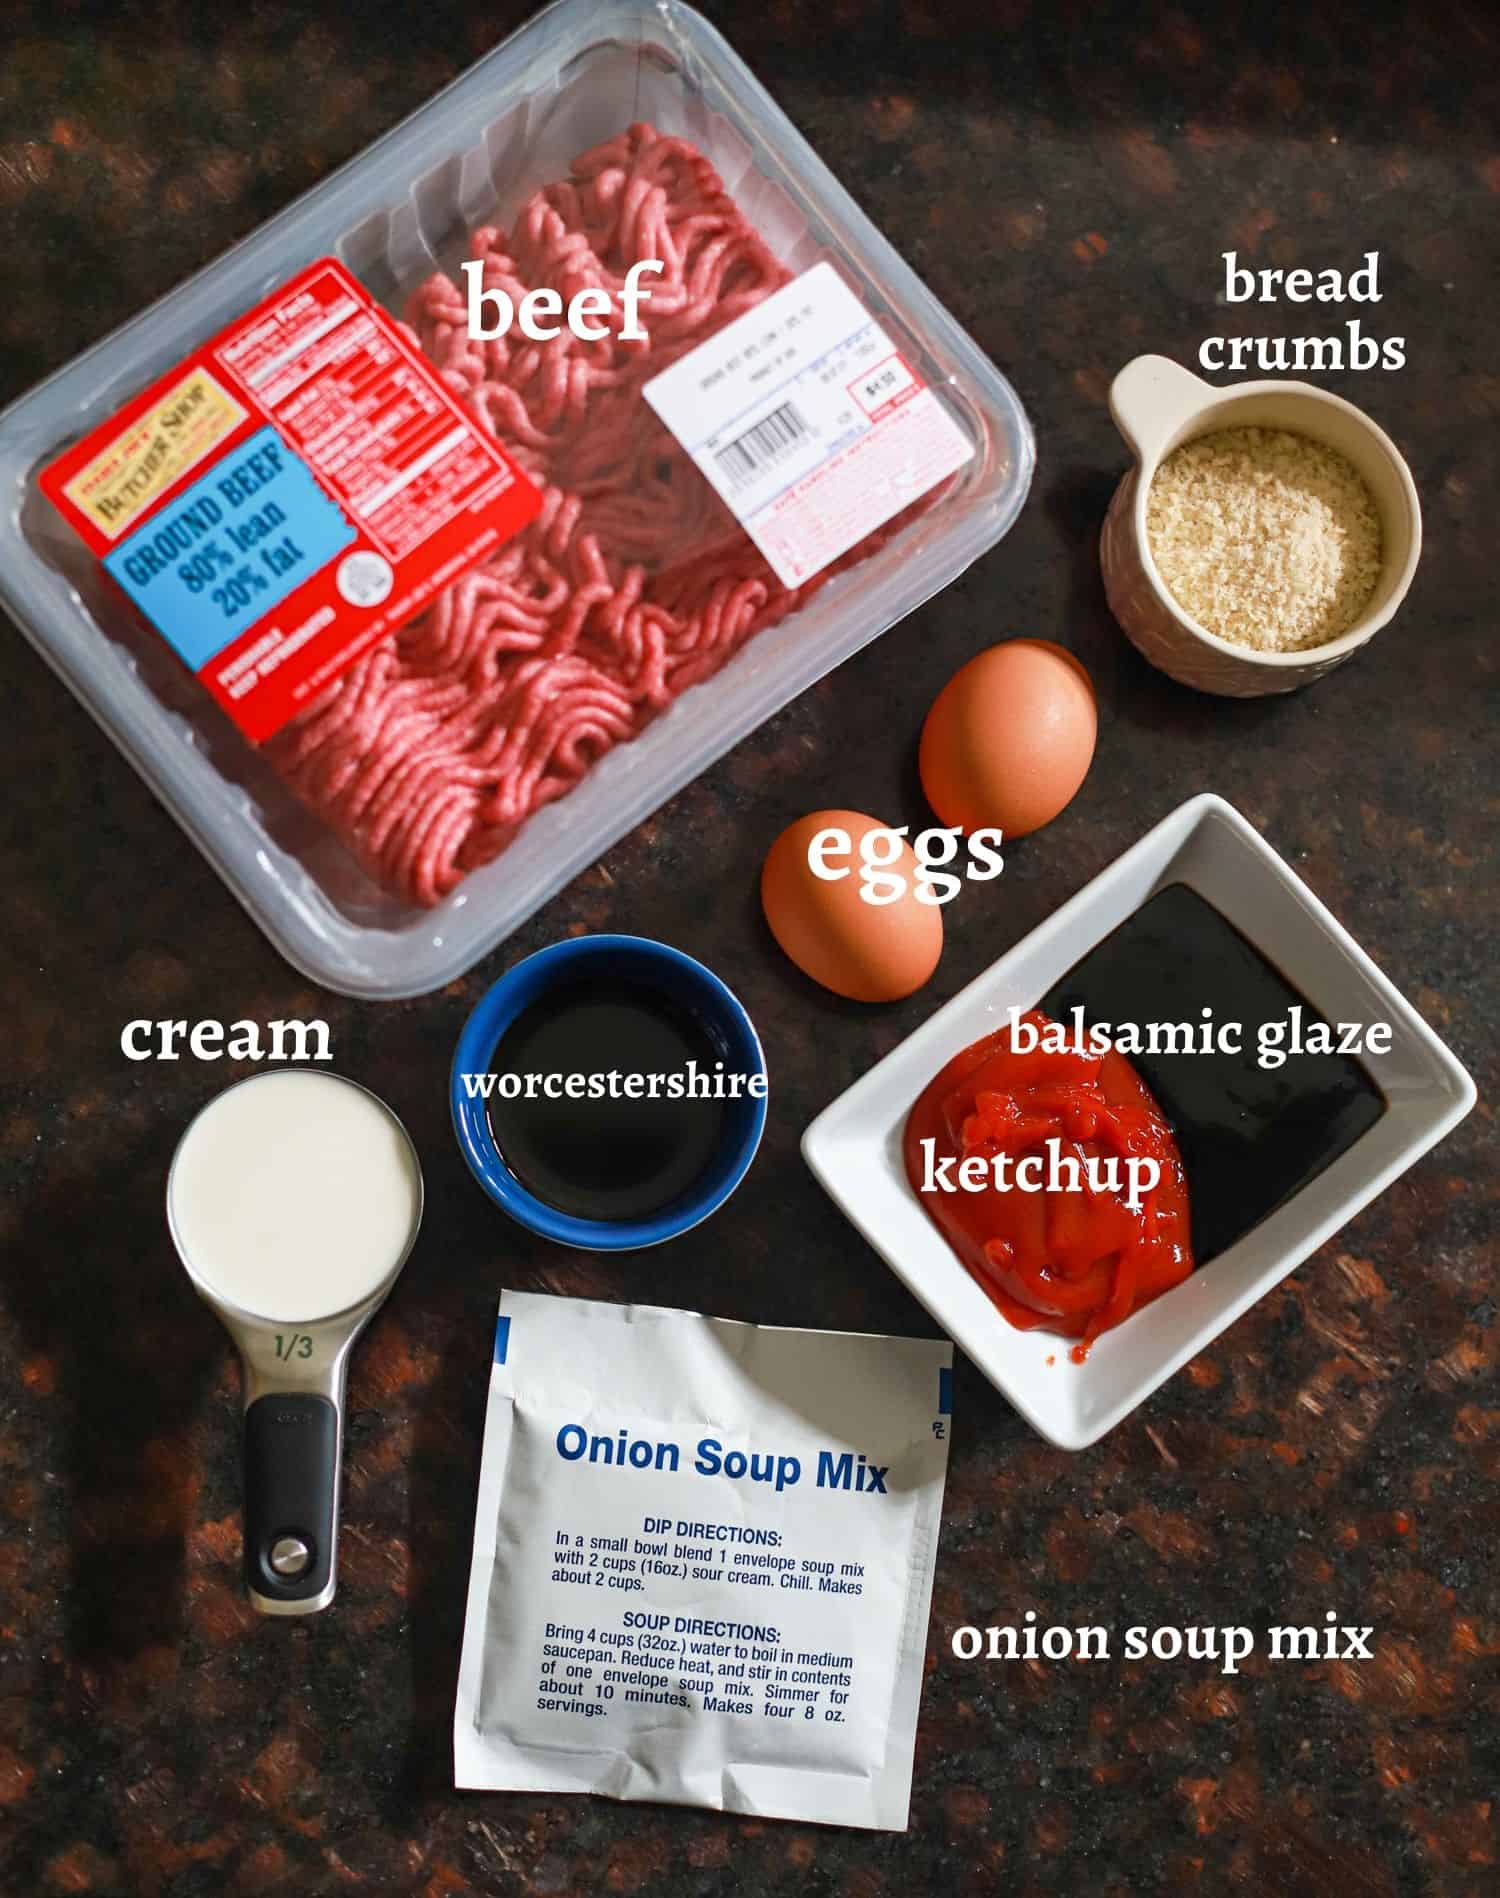 Lipton Onion Soup Meatloaf: Easy Lipton Soup Mix Recipe - Bake It With Love